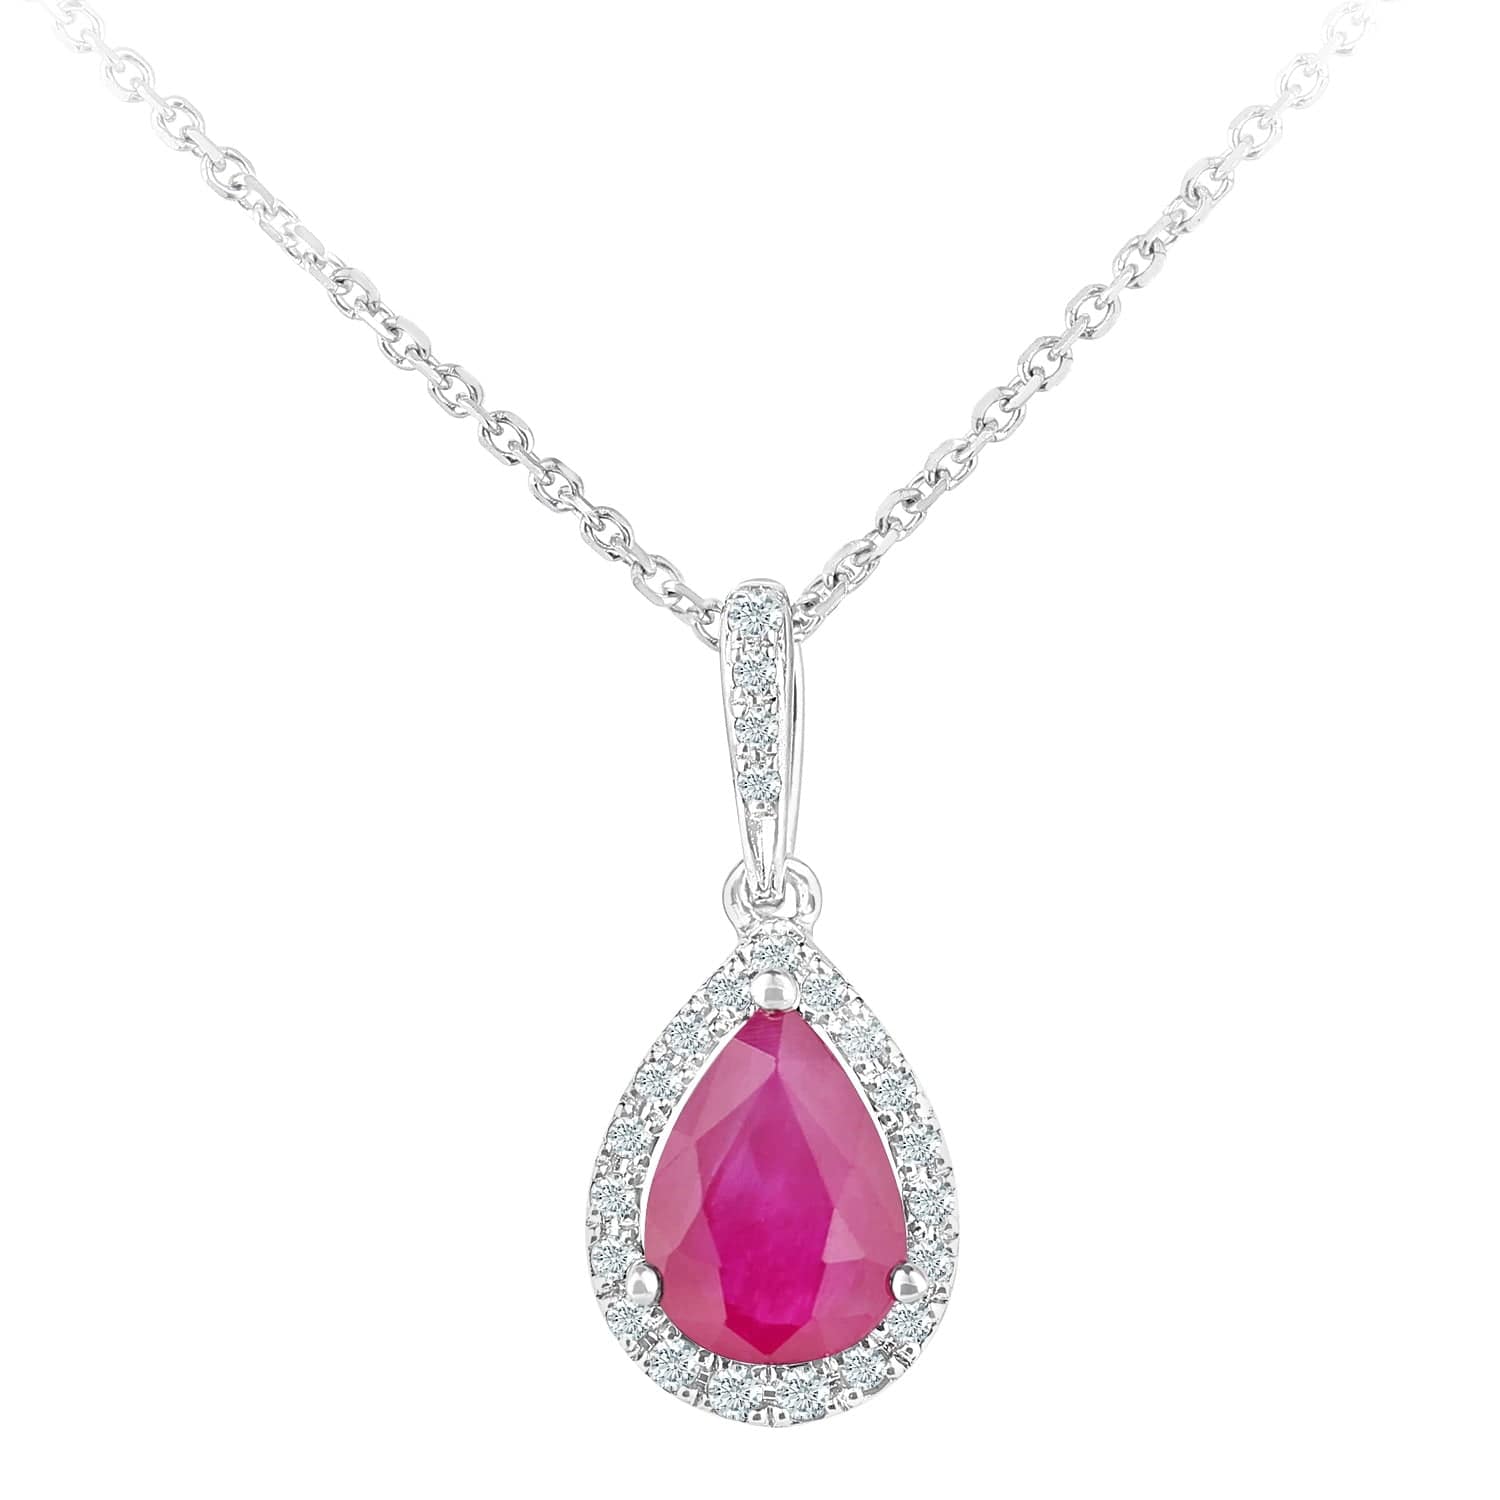 Lynora Luxe Pendant White Gold 9ct / Ruby 9ct White Gold Ruby and Diamond Teardrop Pendant Necklace